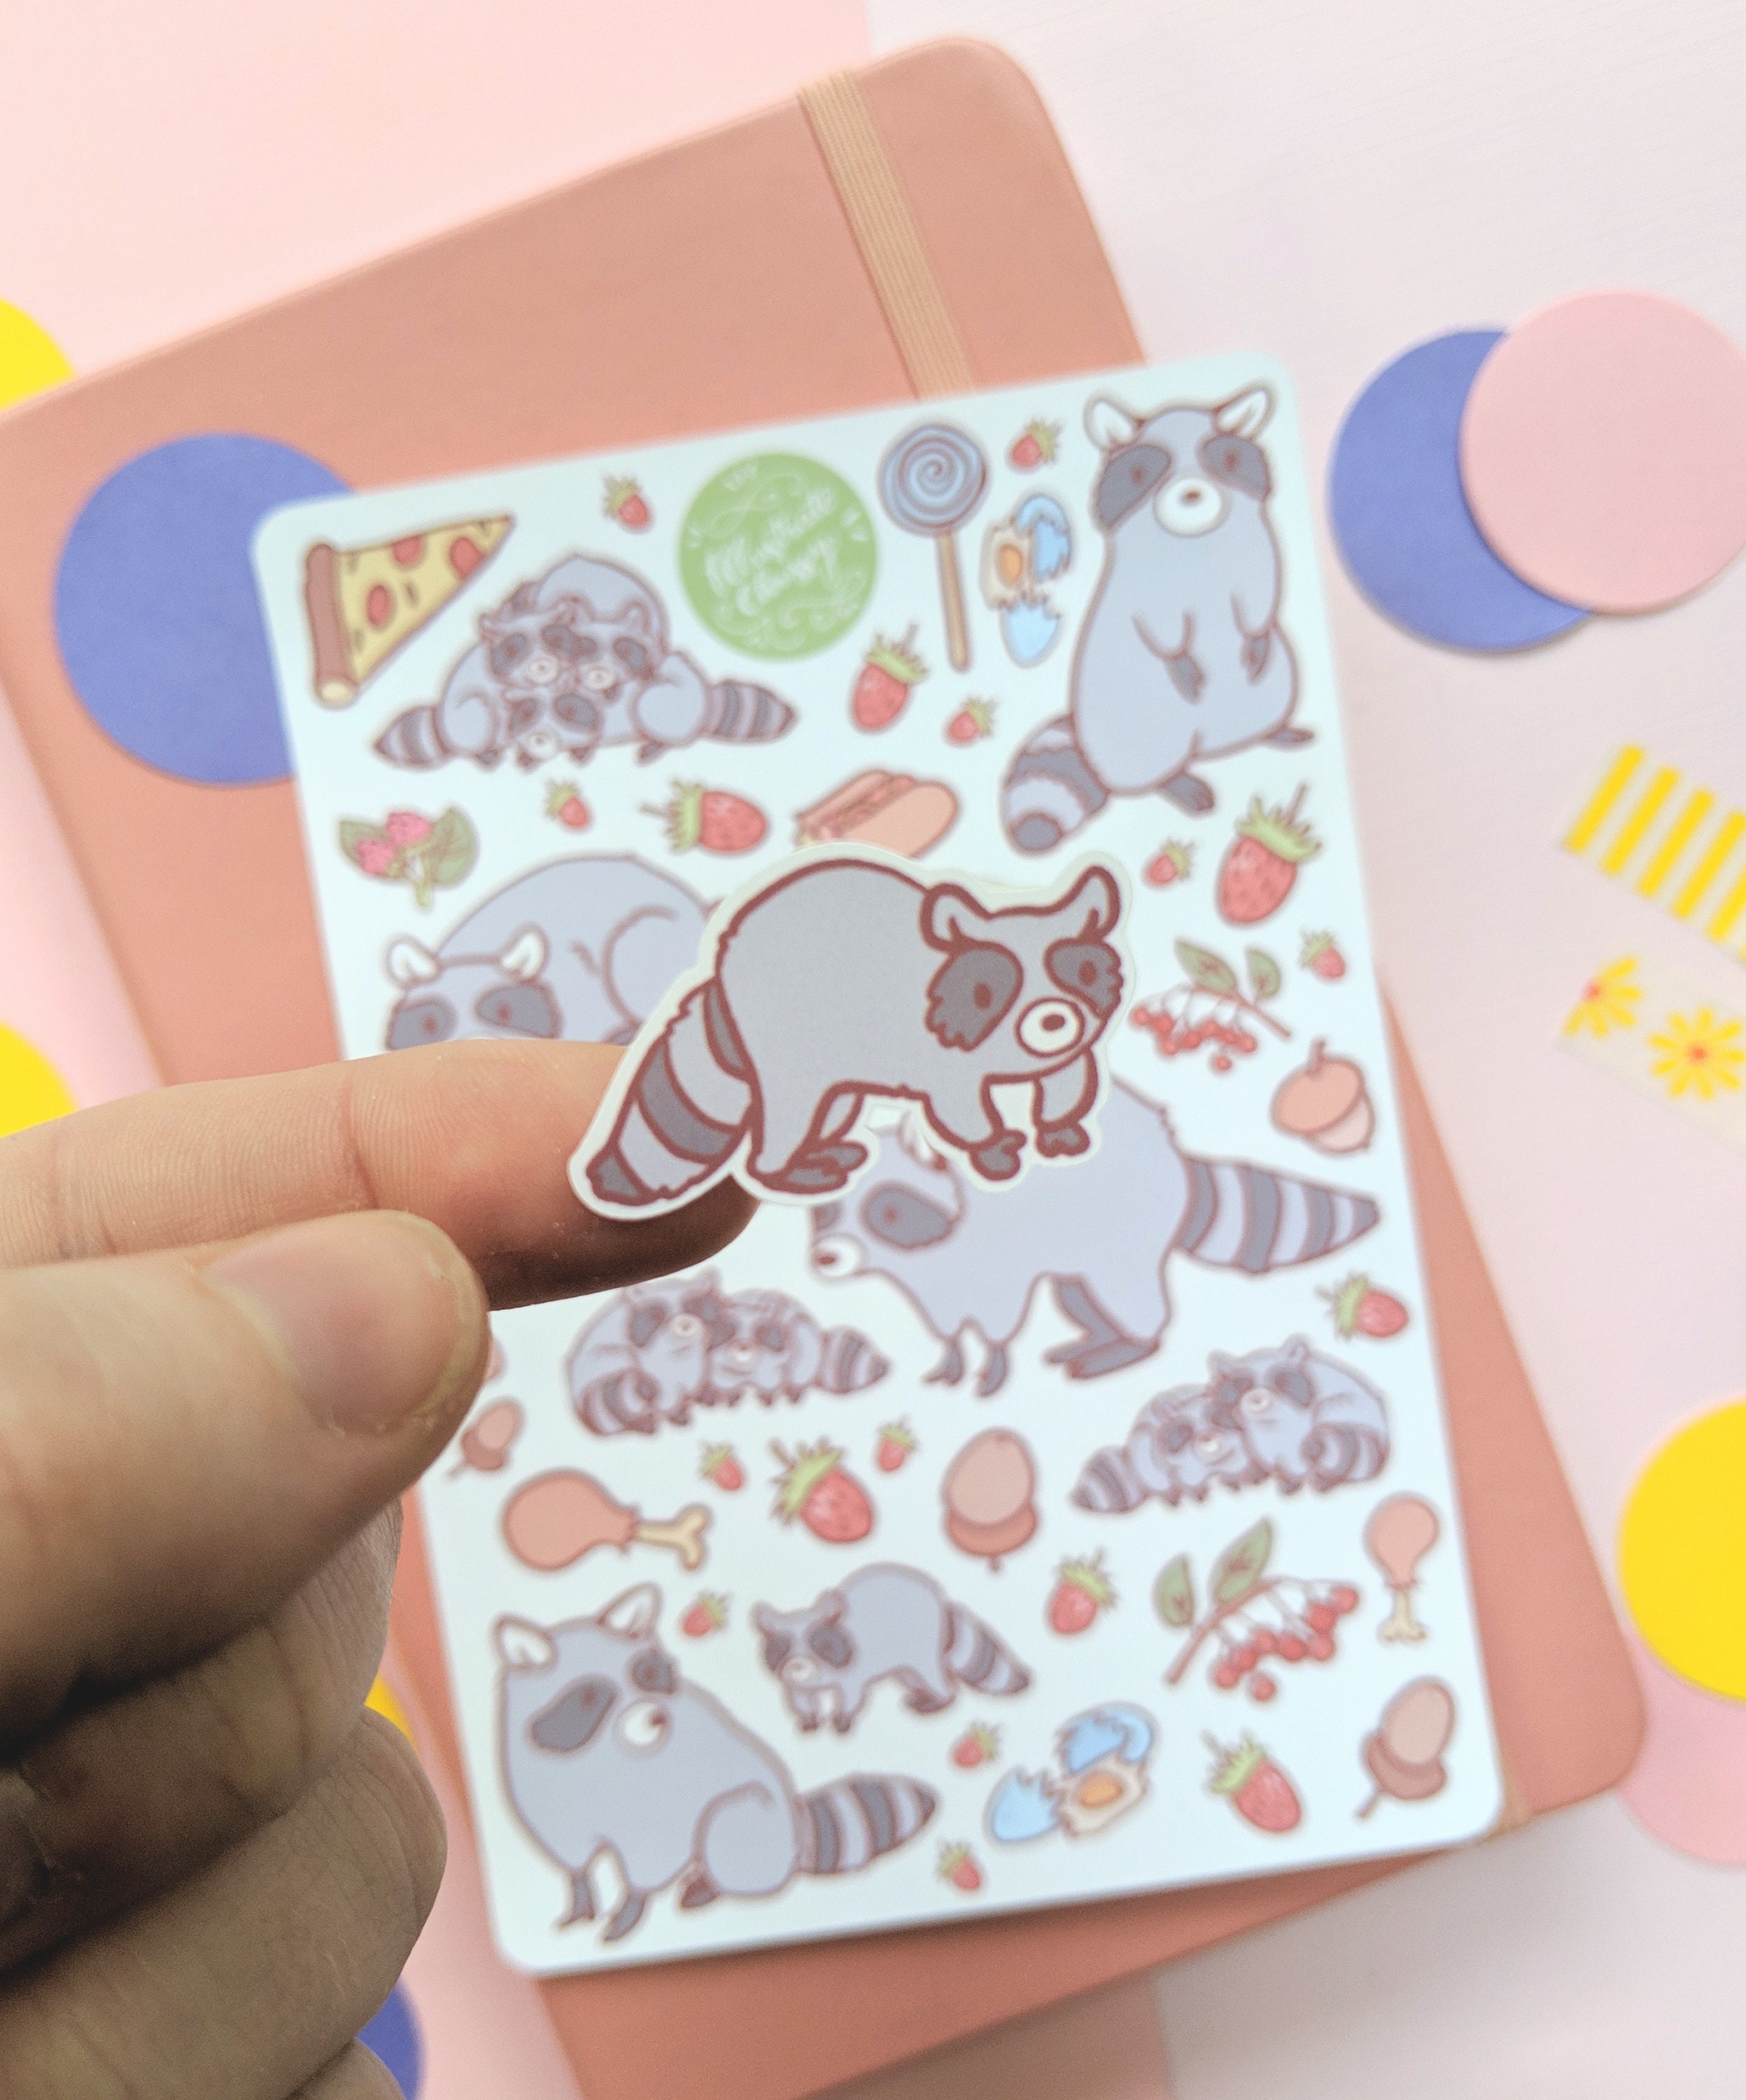 45x Cute Little Raccoons DIY Diary Stickers Paper Labels Gift Packaging Decor SJ 